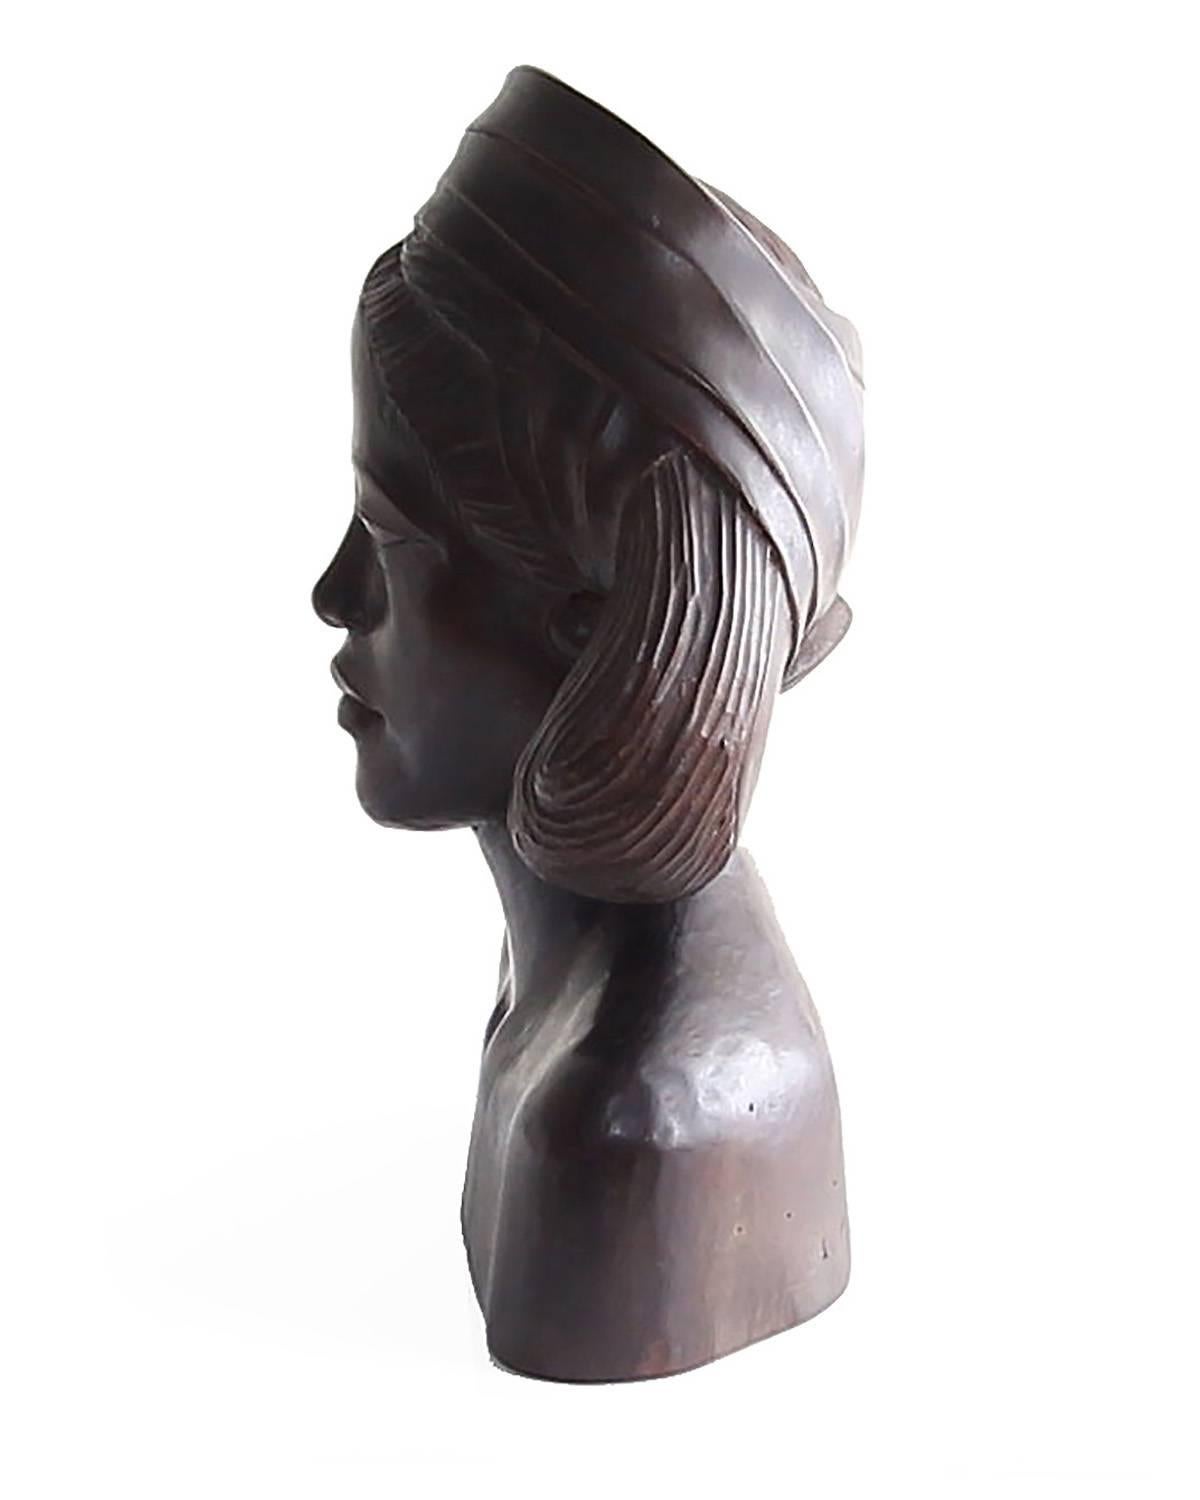 Art Deco Beautiful Carved Mahogany Bust of Balinese Woman Wearing Headscarf